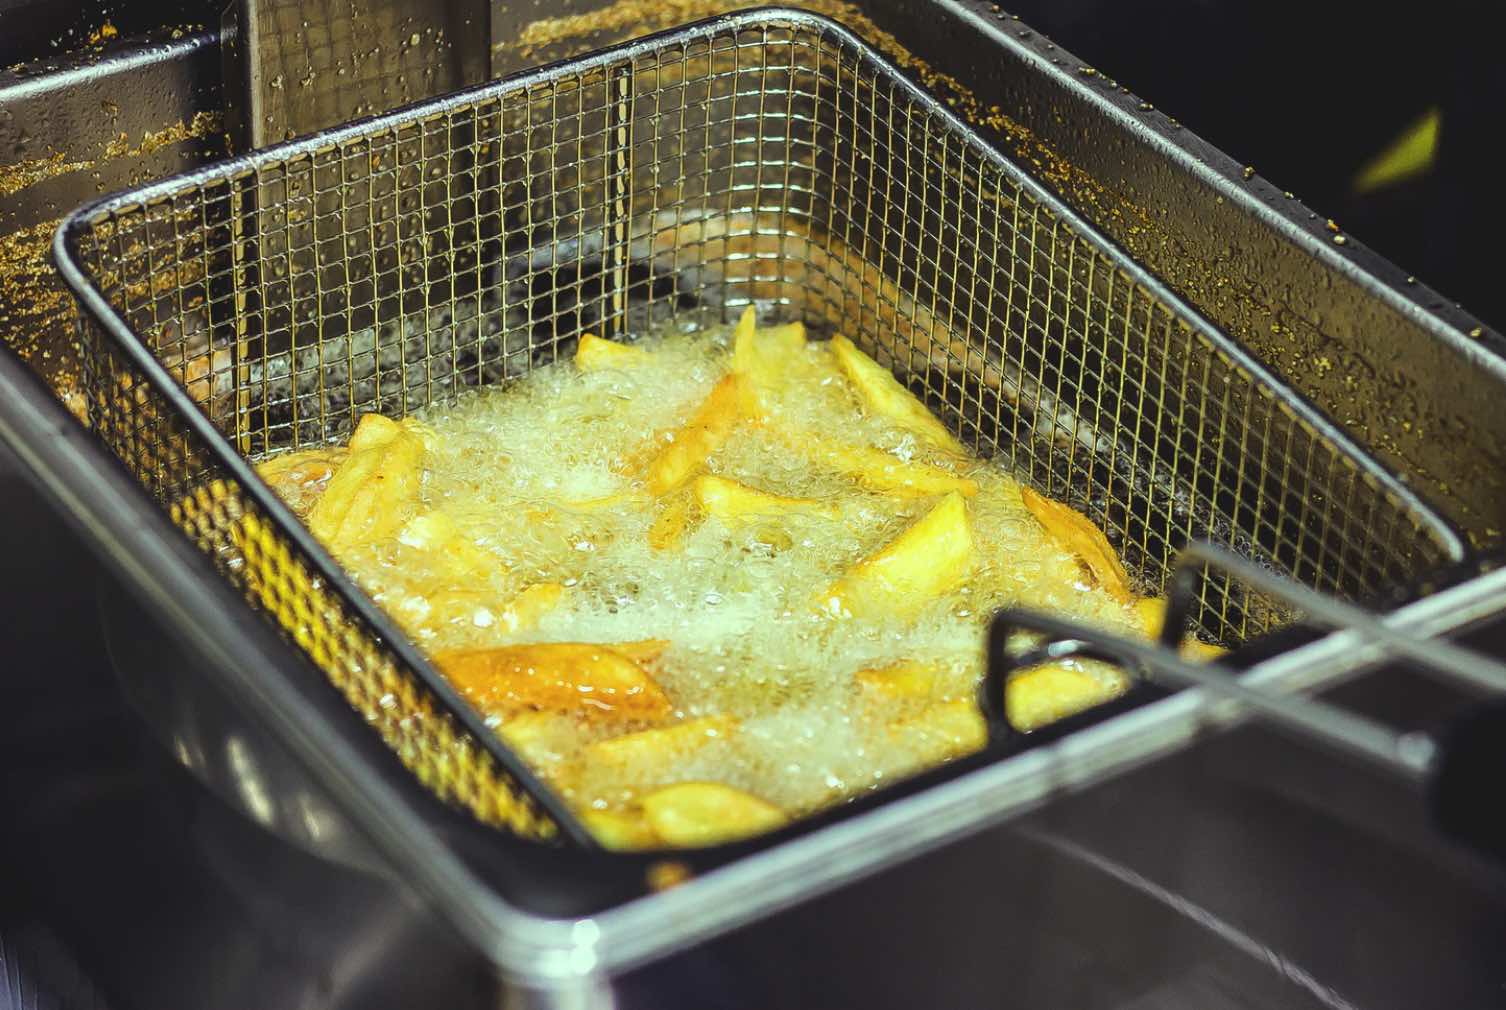 https://www.touchstonecommercialservices.com/wp-content/uploads/2020/01/fries-getting-cooked-in-silver-clean-deep-fryer.jpg